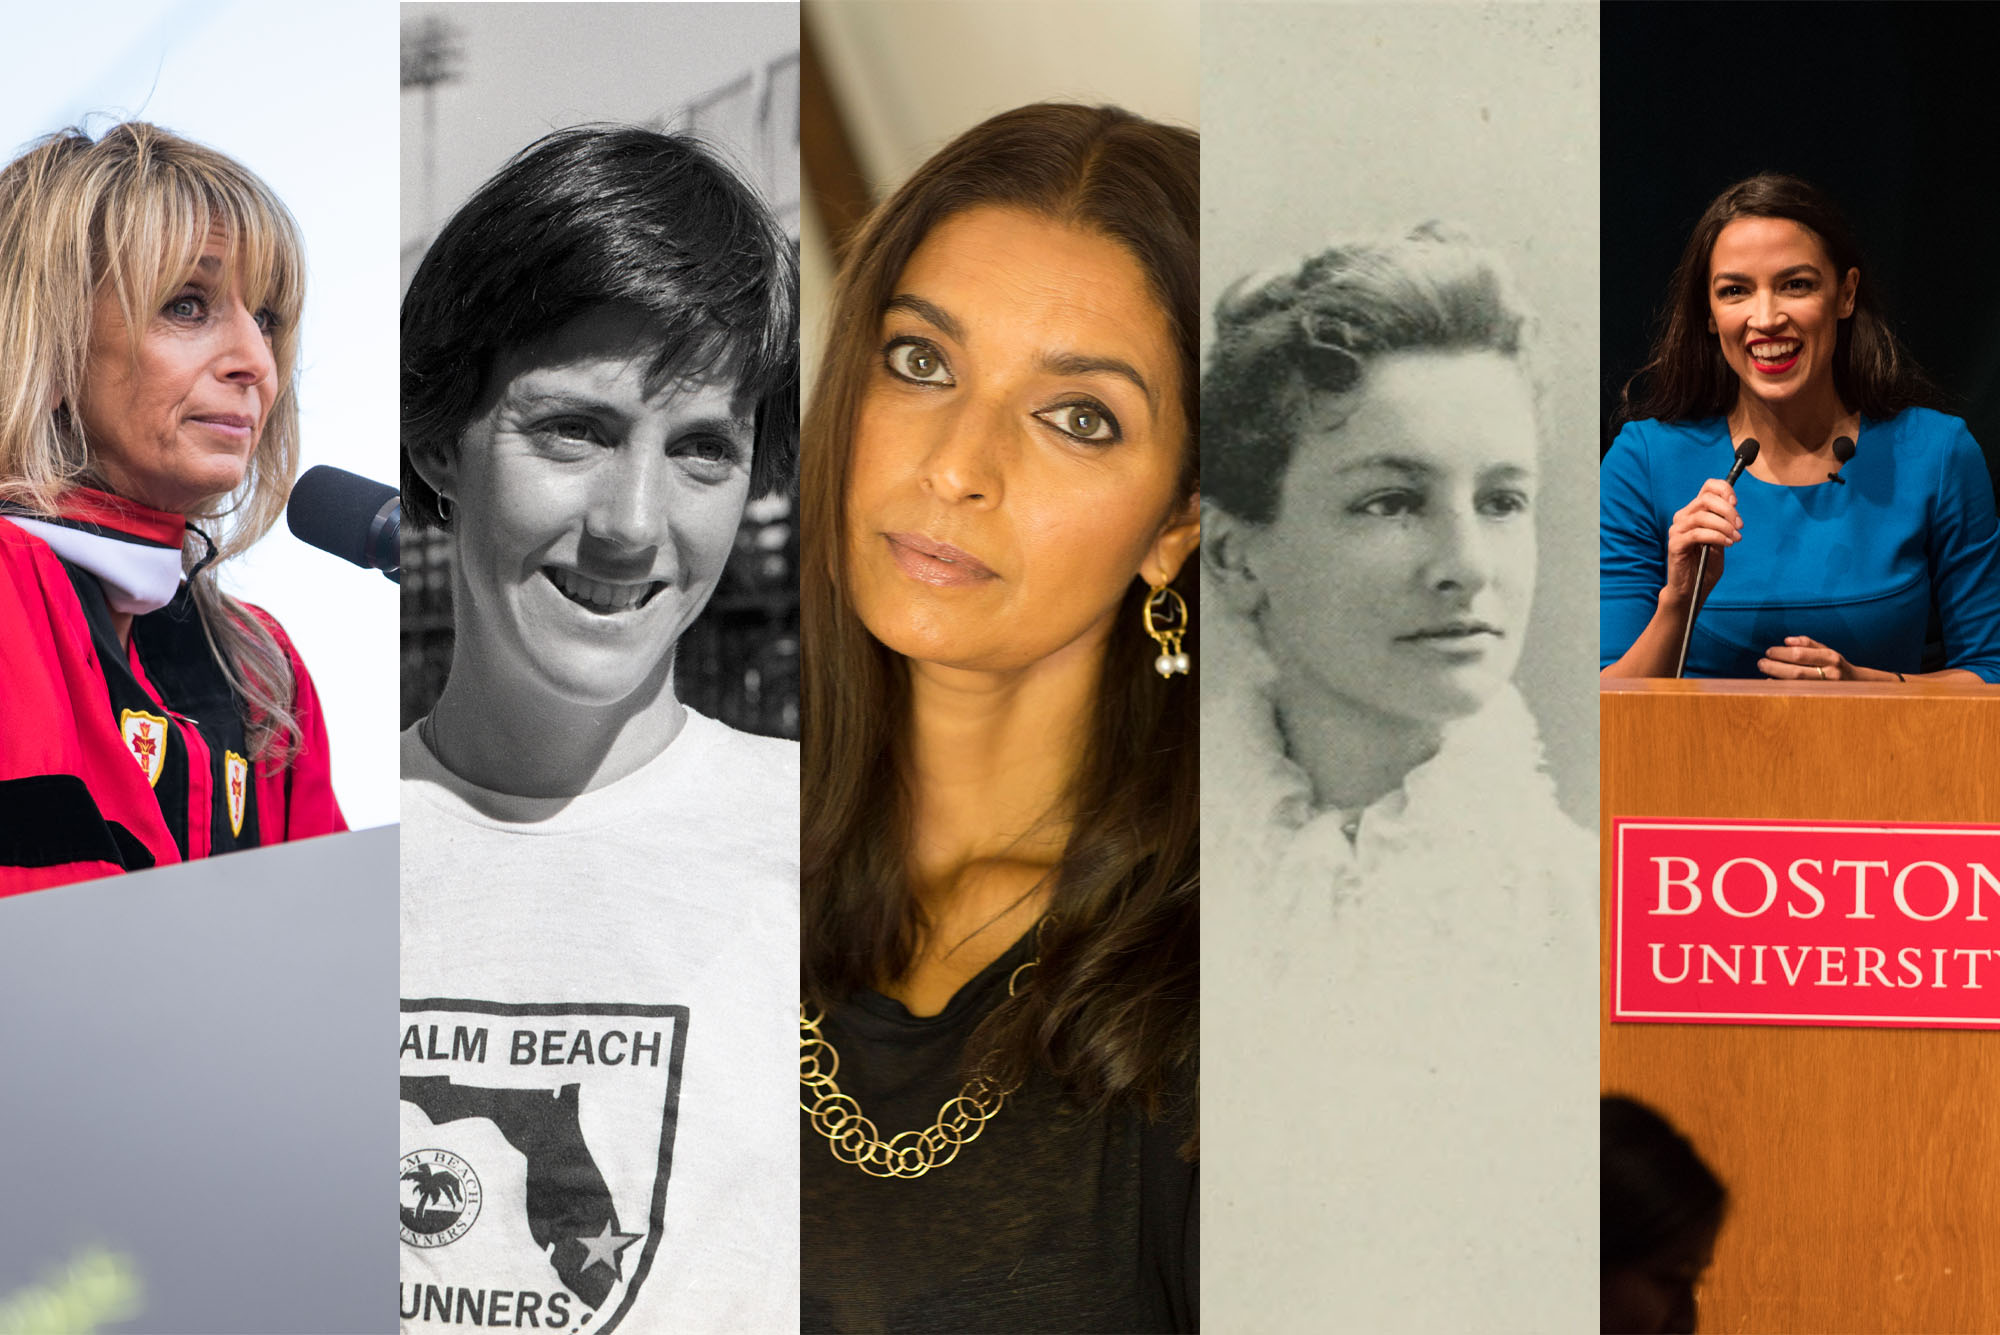 Collage of 5 photos of various women BU alums. Photos from left to right of: Bonnie Hammer, Joan Benoit Samuelson, Jhumpa Lahiri, Lucy Wheelock, and Alexandria Ocasio-Cortez